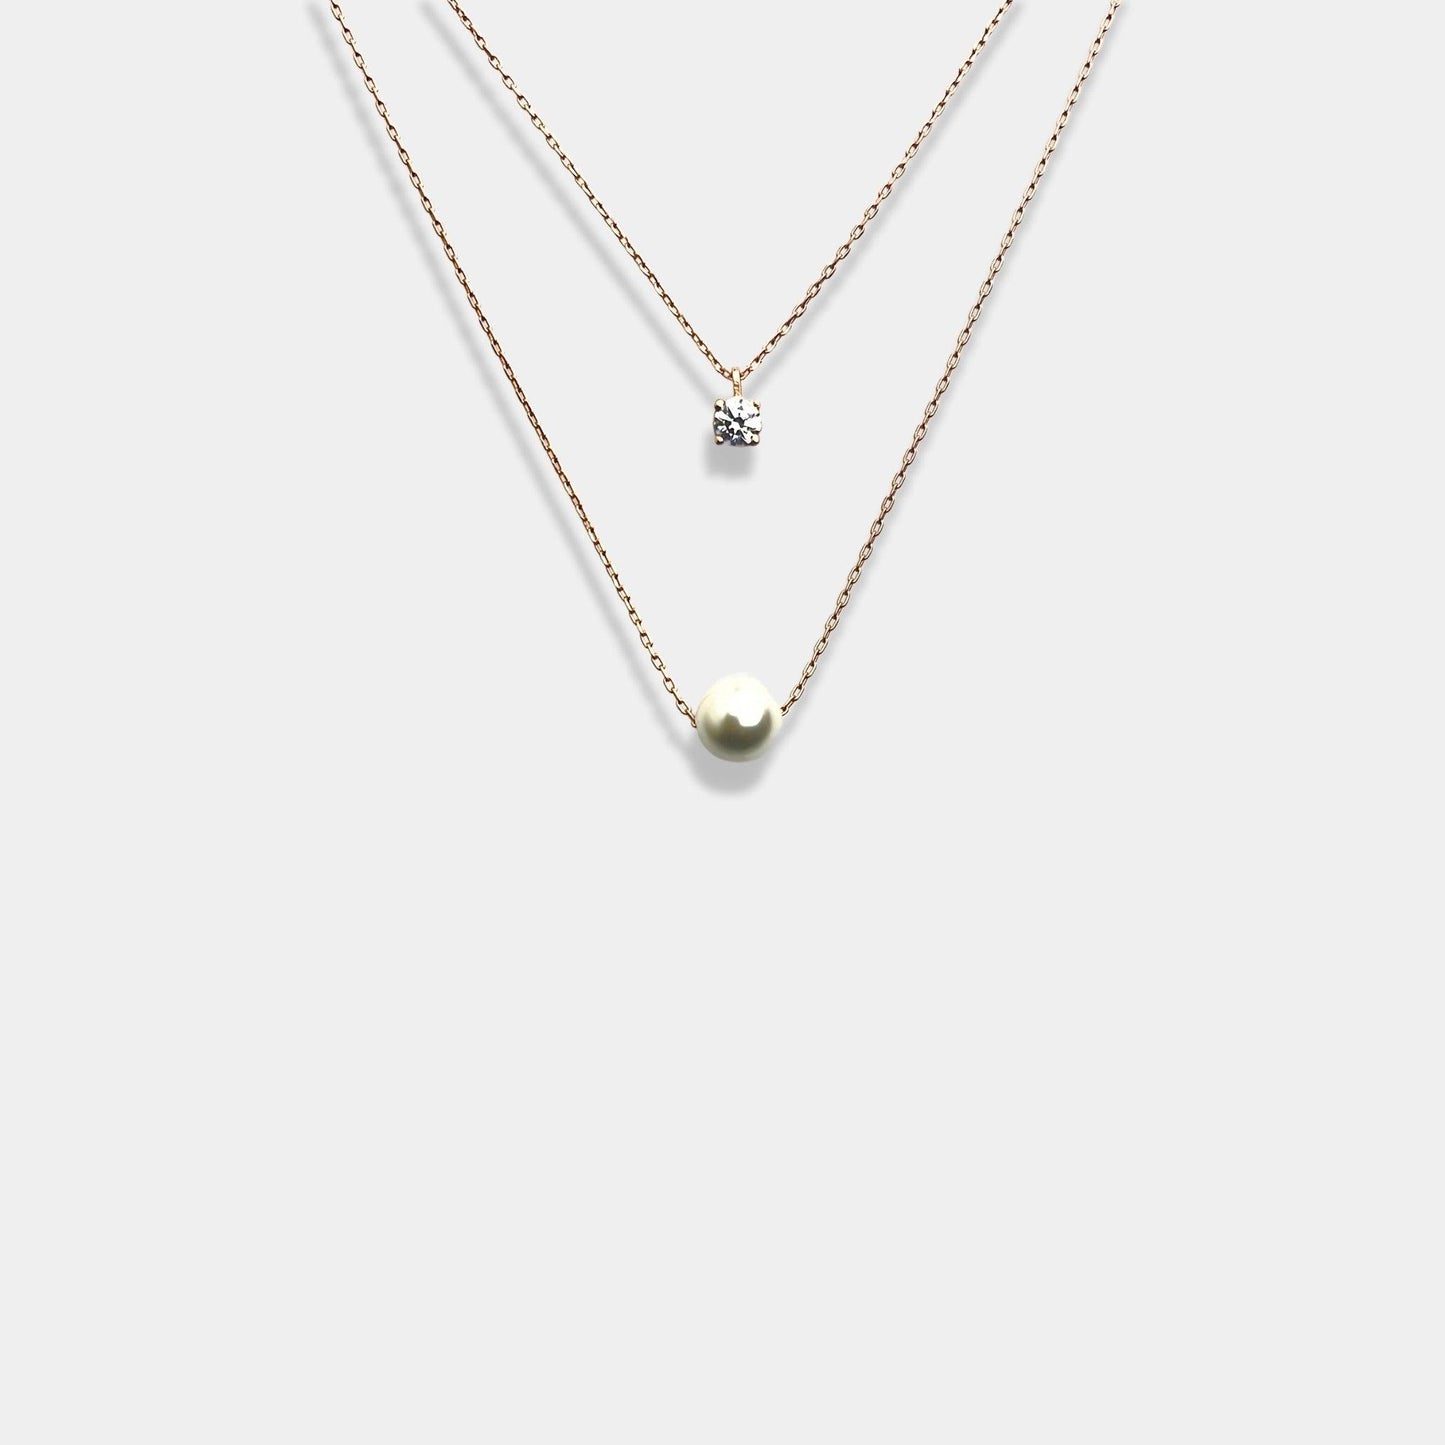 Experience the epitome of luxury with our sterling silver necklace, adorned with a graceful circle pendant and delicately layered chain for a truly enchanting look